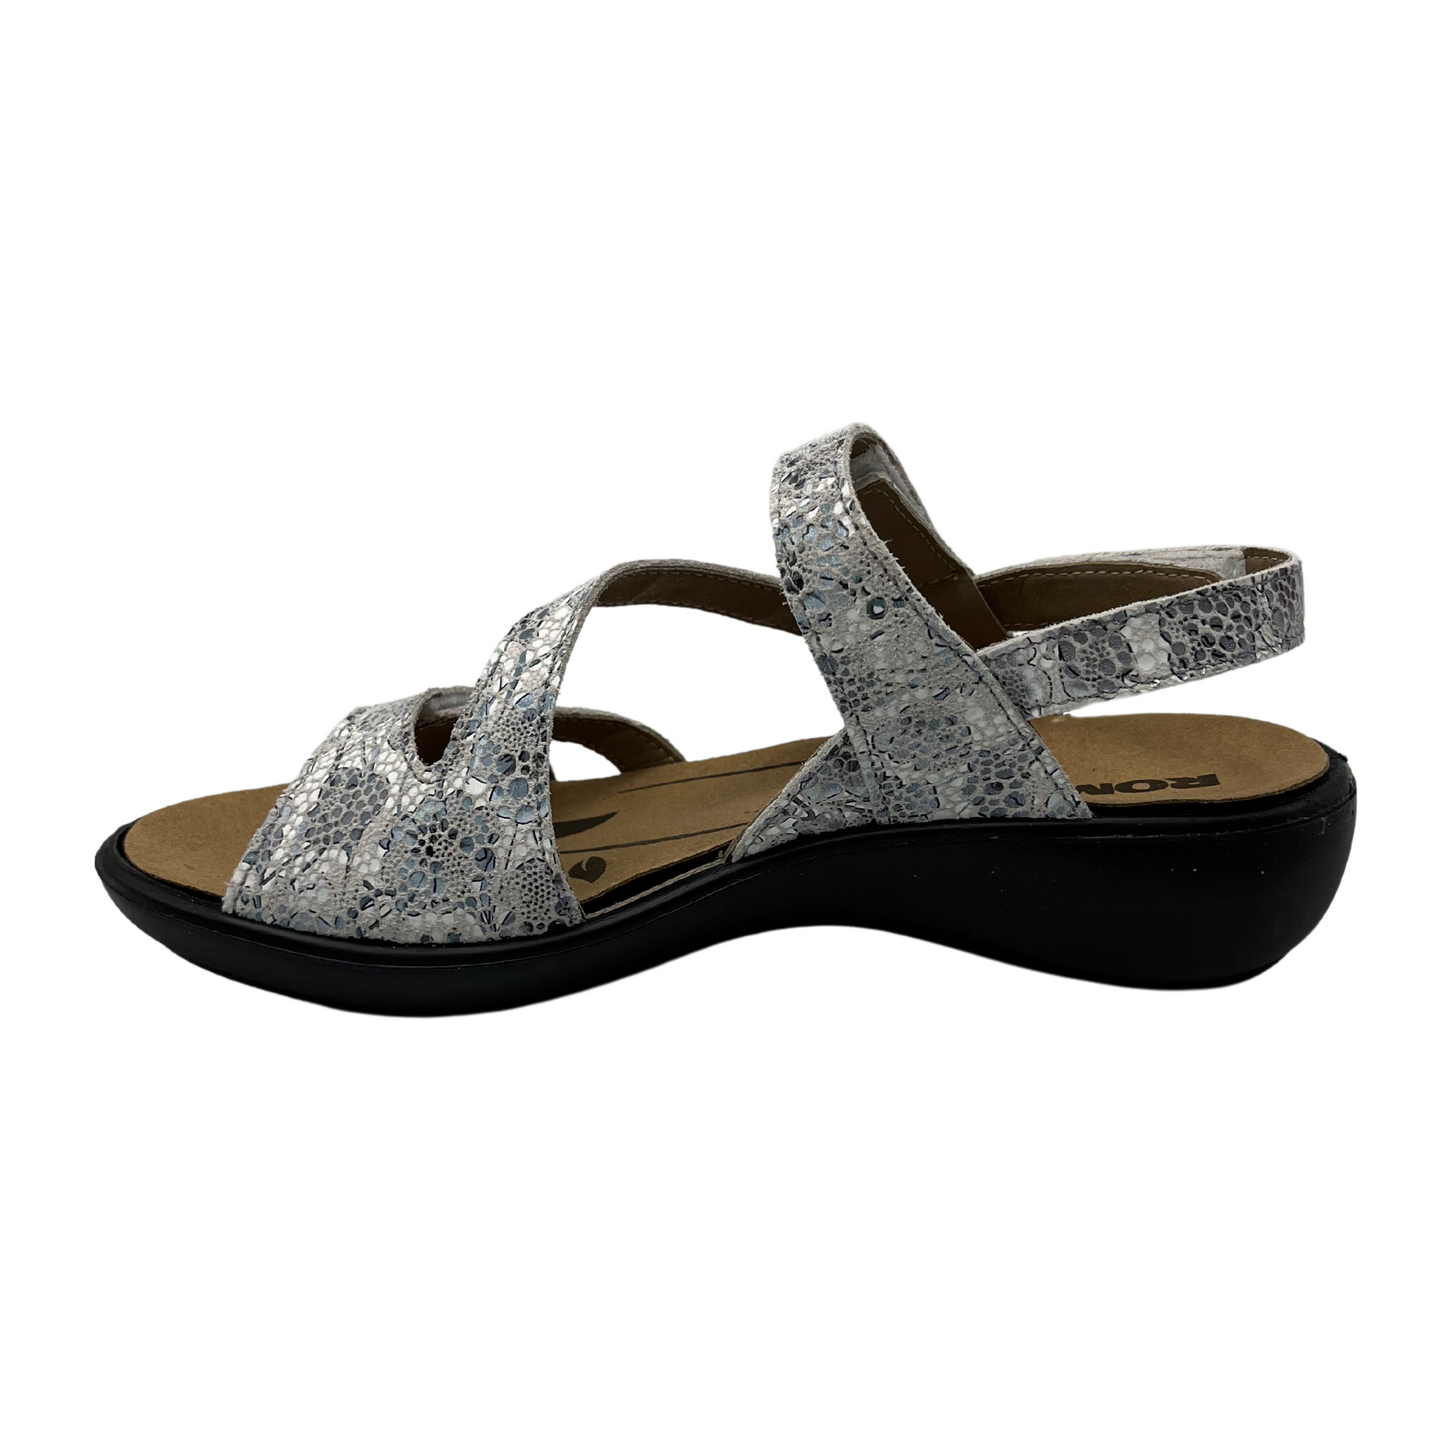 Left facing view of white and grey patterned sandal with black rubber outsole